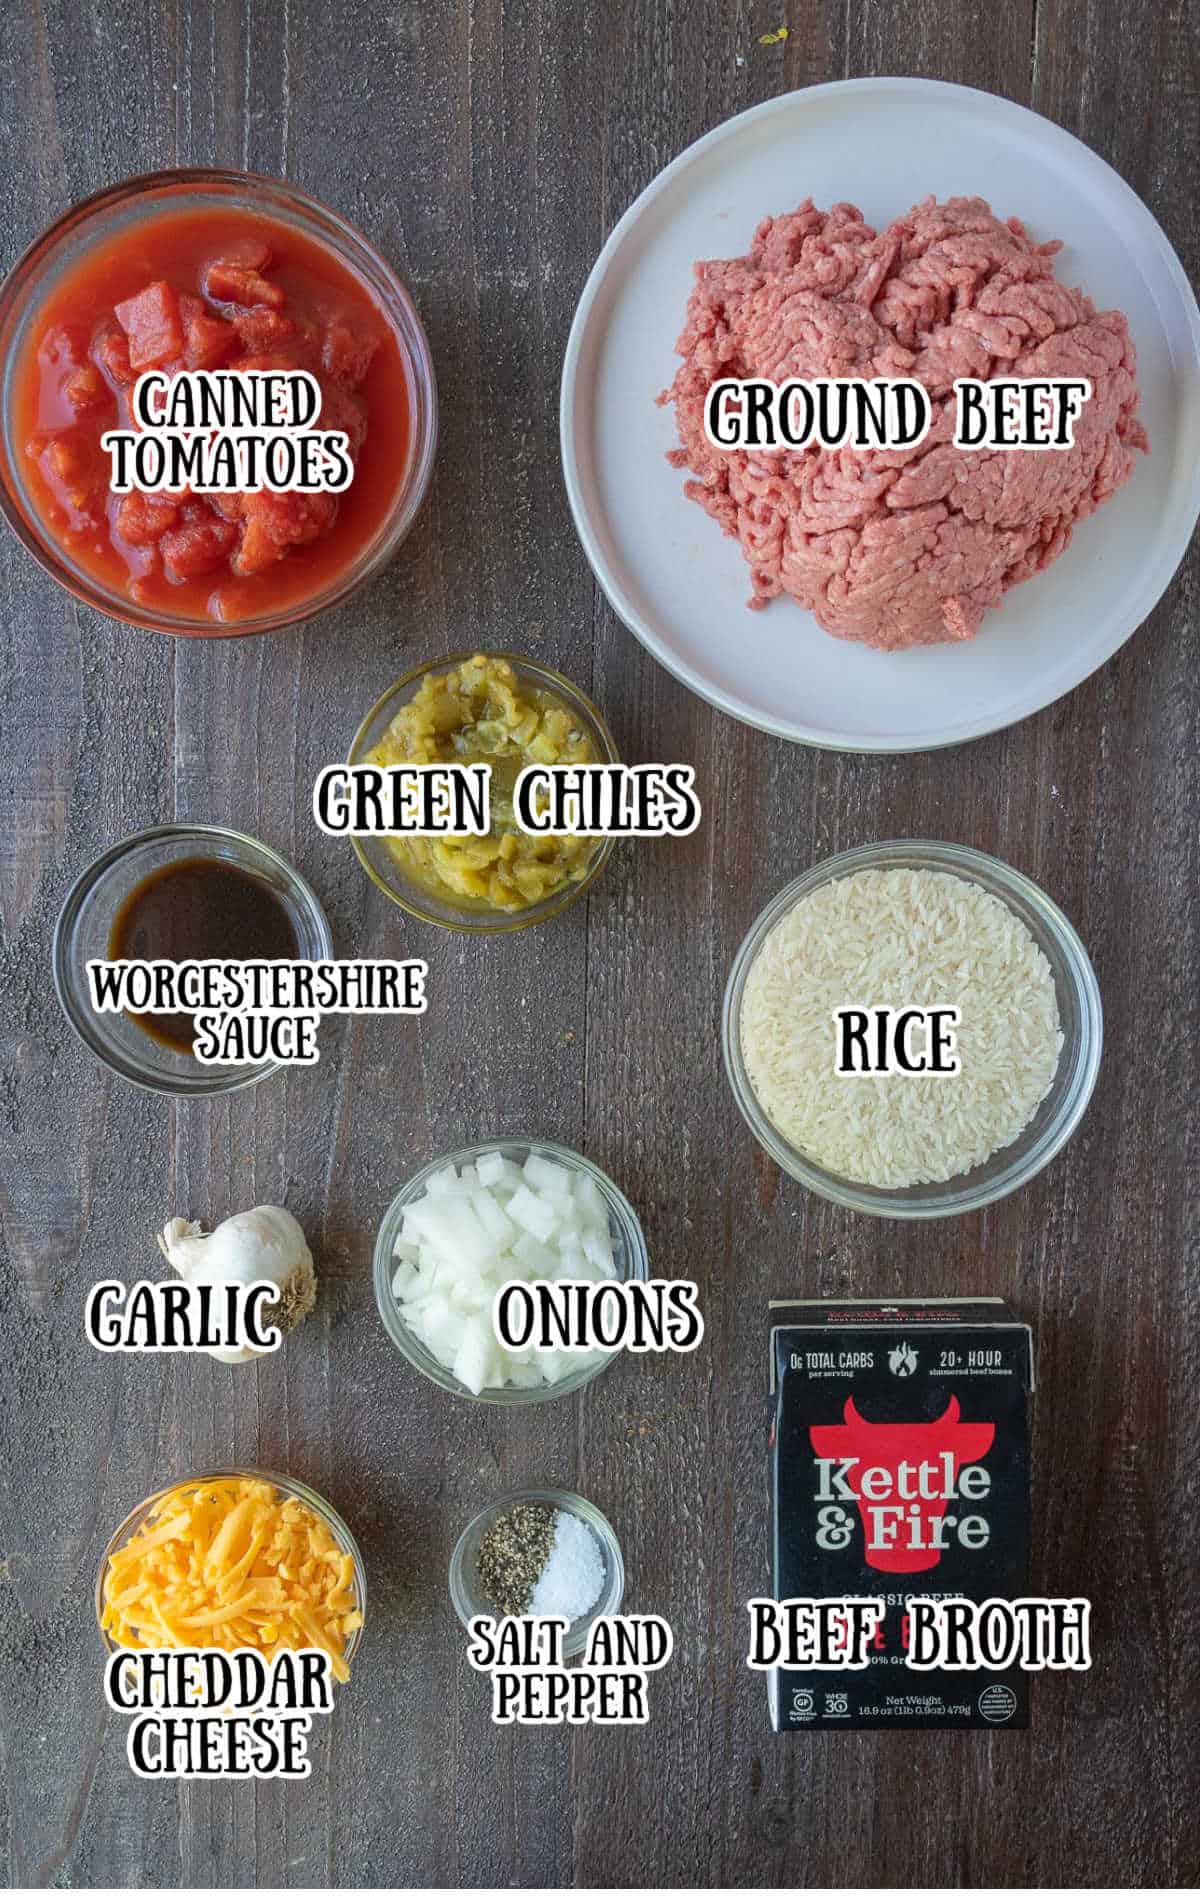 All the ingredients needed for the recipe.